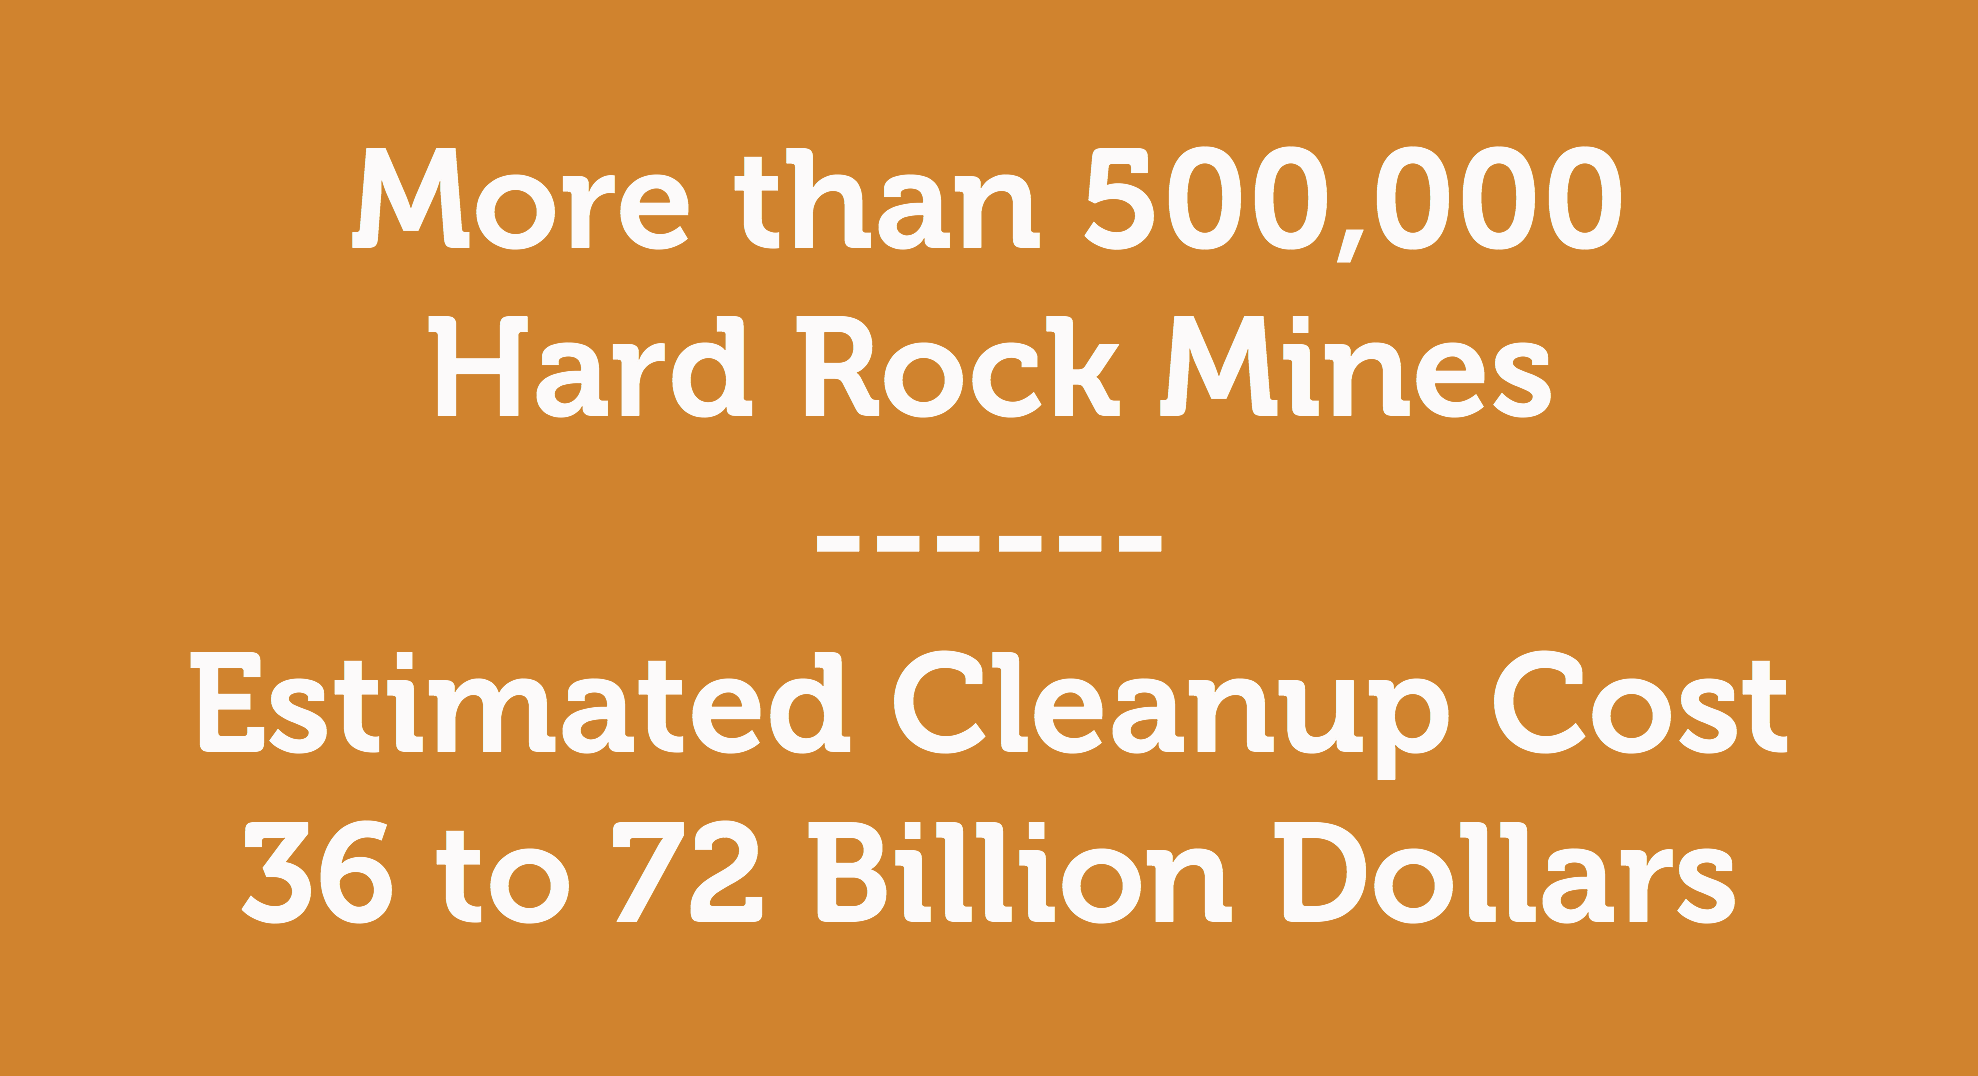 More than 500,000 Hard Rock Mines in the West